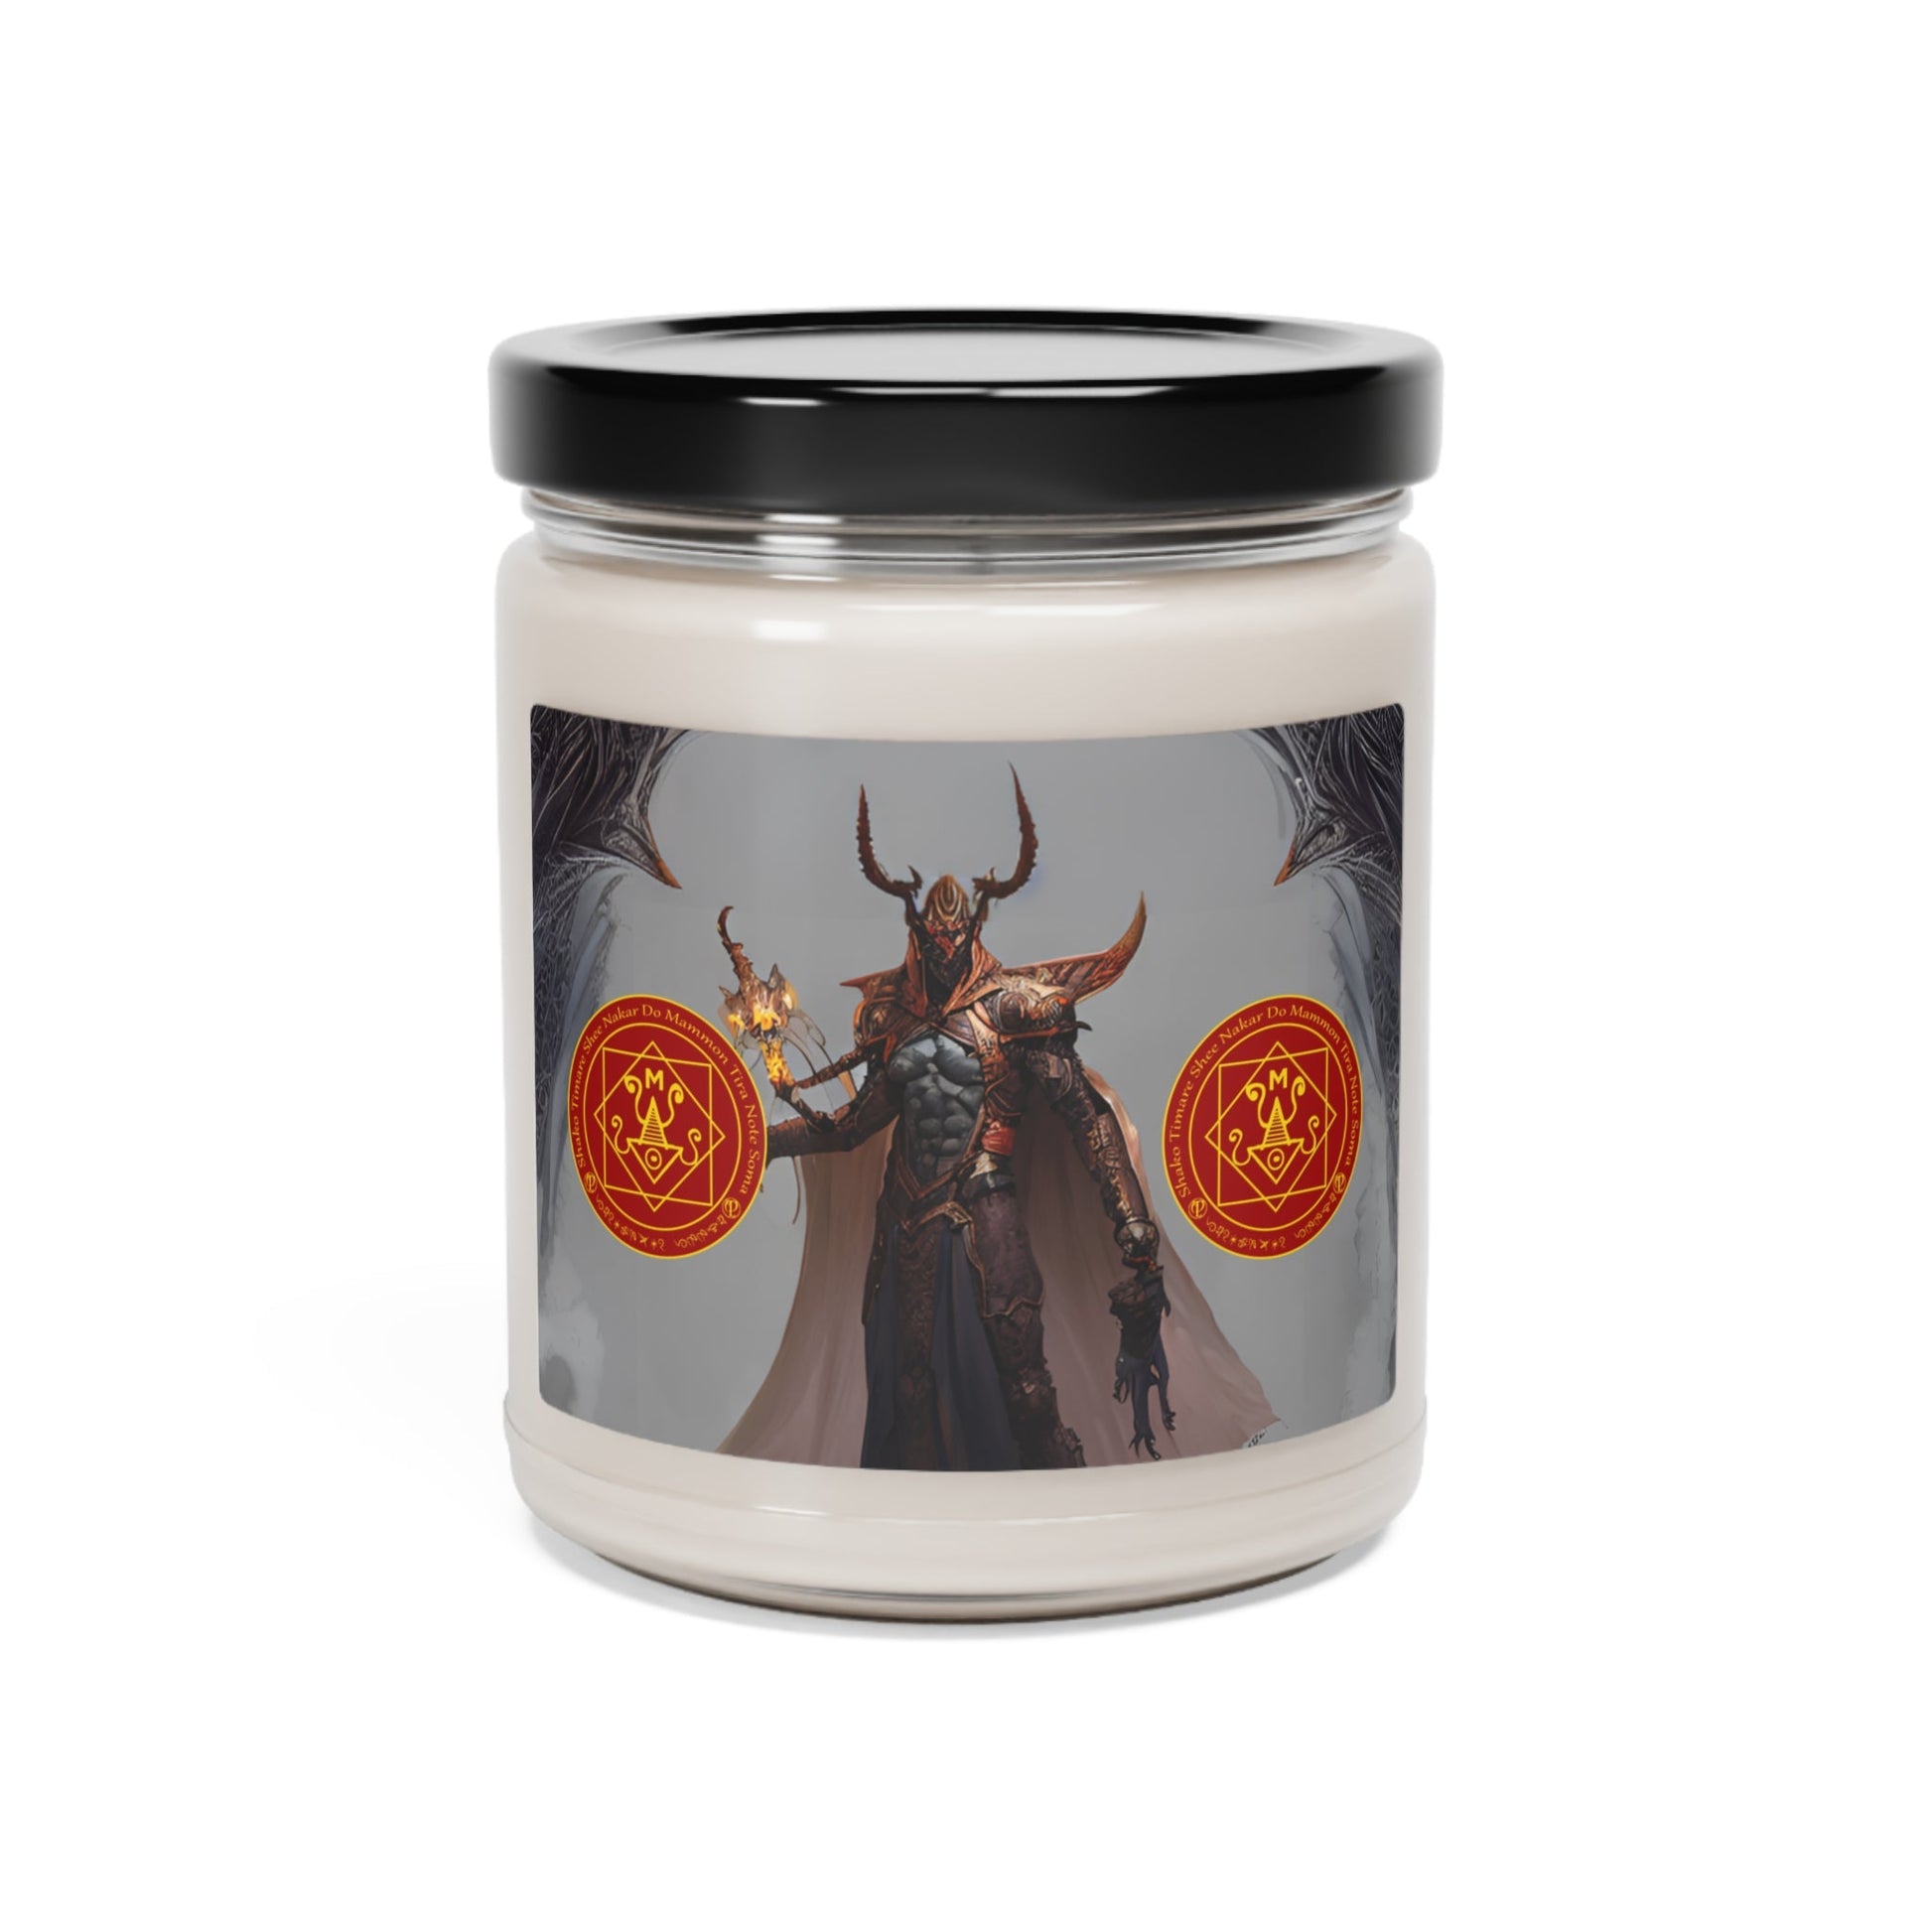 Demon-Mammon-Altar-Scented-Soy-Candle-for-Money-related-offerings-rituals-initiations-or-praying-and-meditation-21